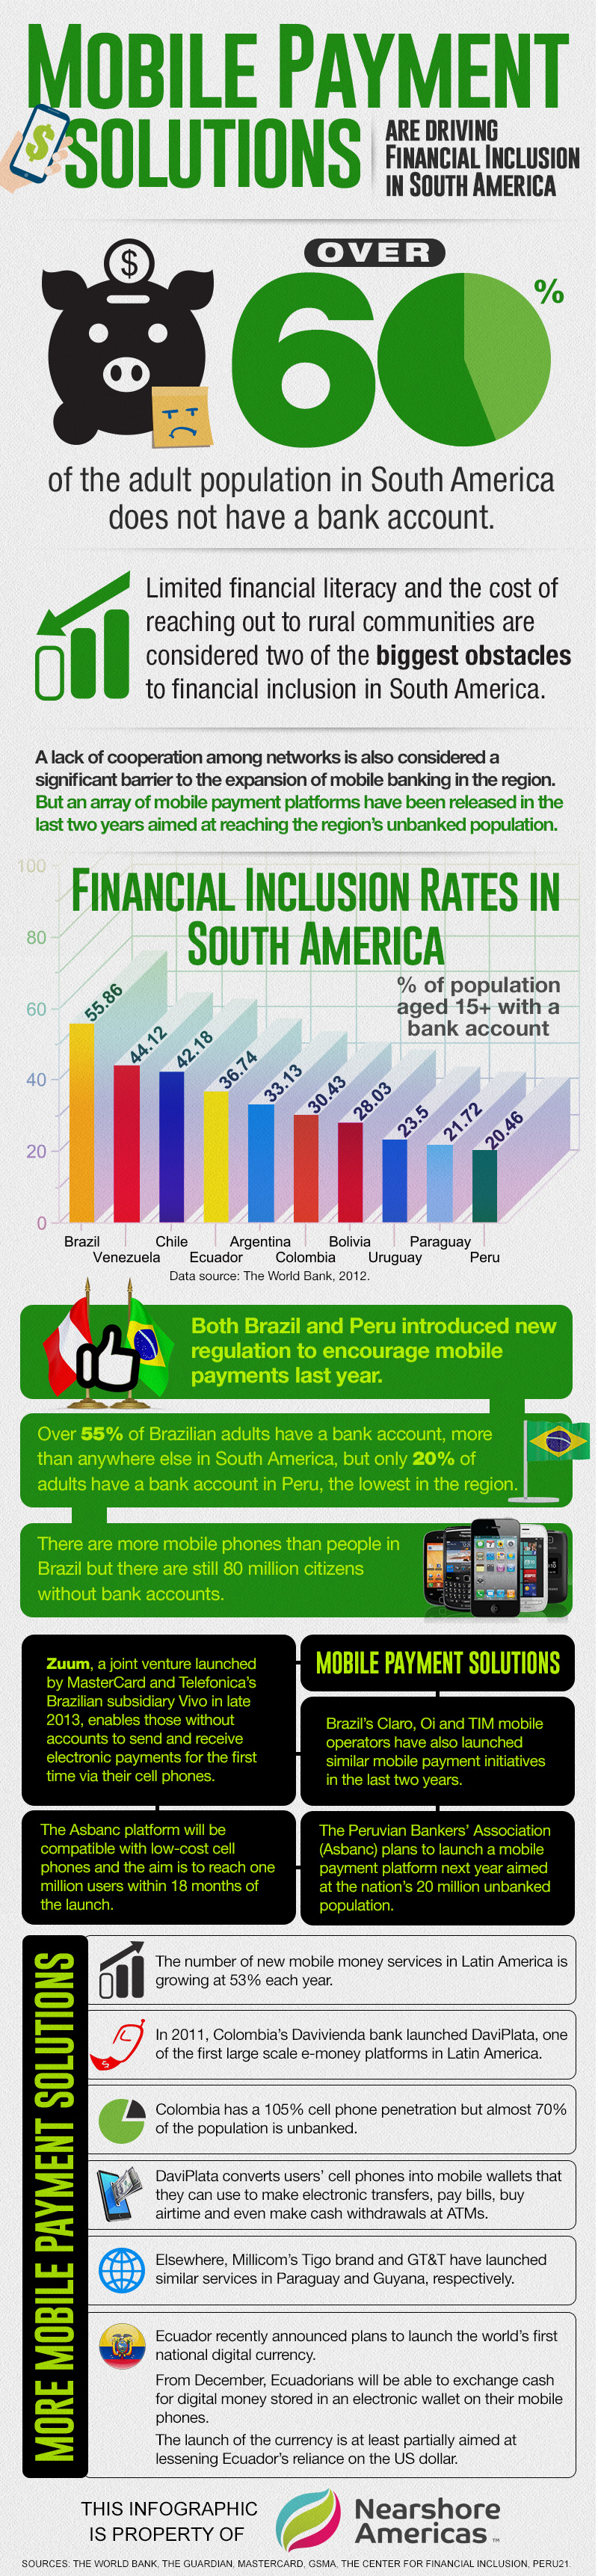 Infographic: Mobile Payment Solutions Are Driving Financial Inclusion in South America